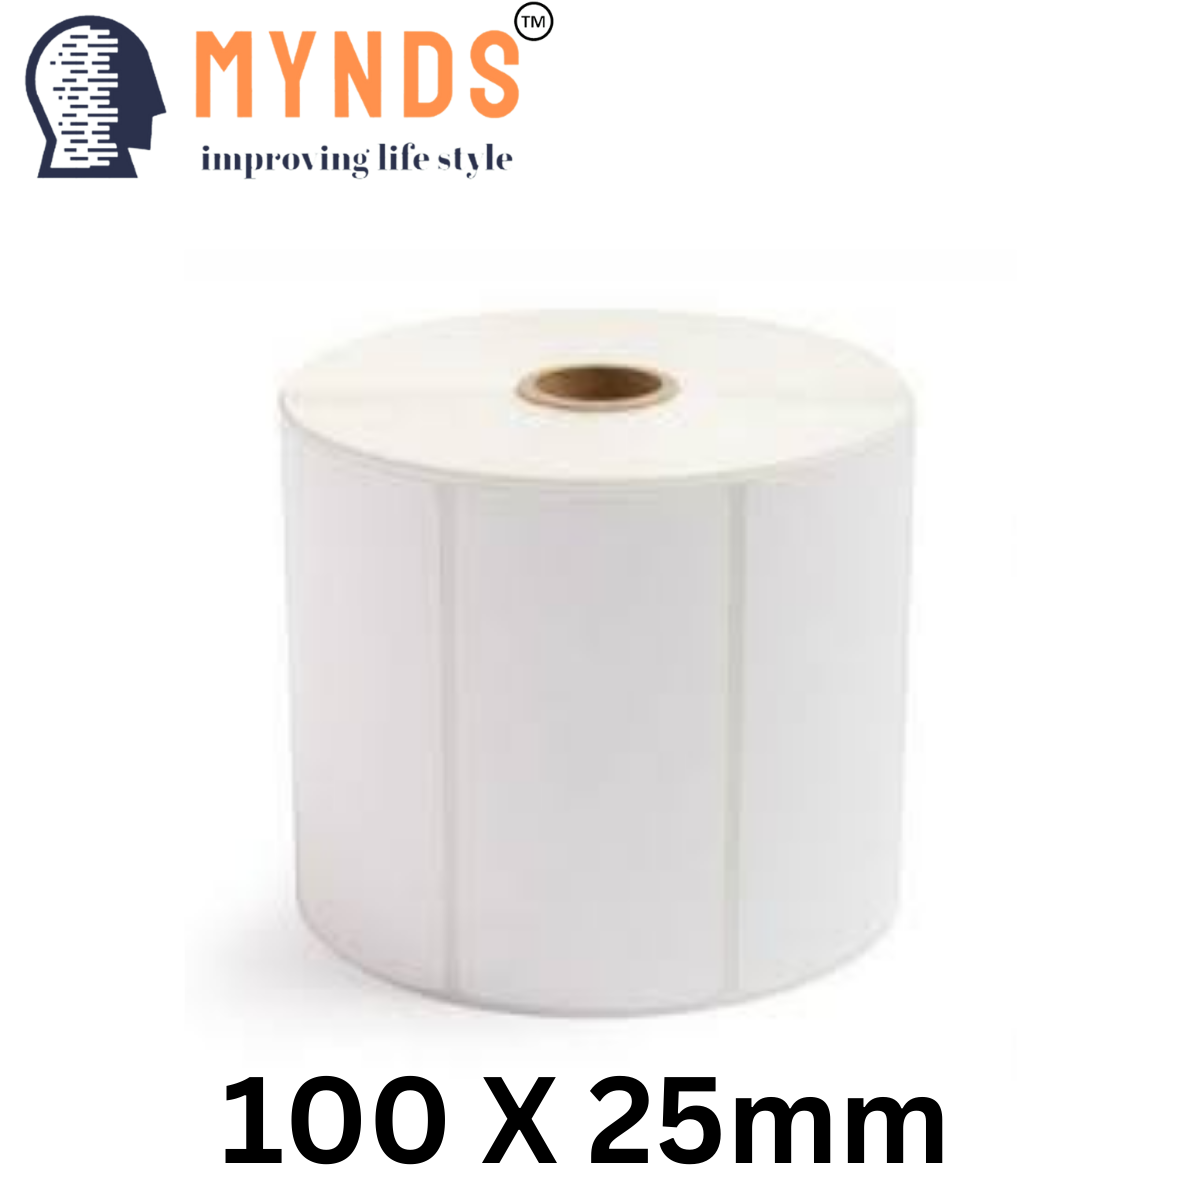 100 x 25mm Paper Label by MYNDS